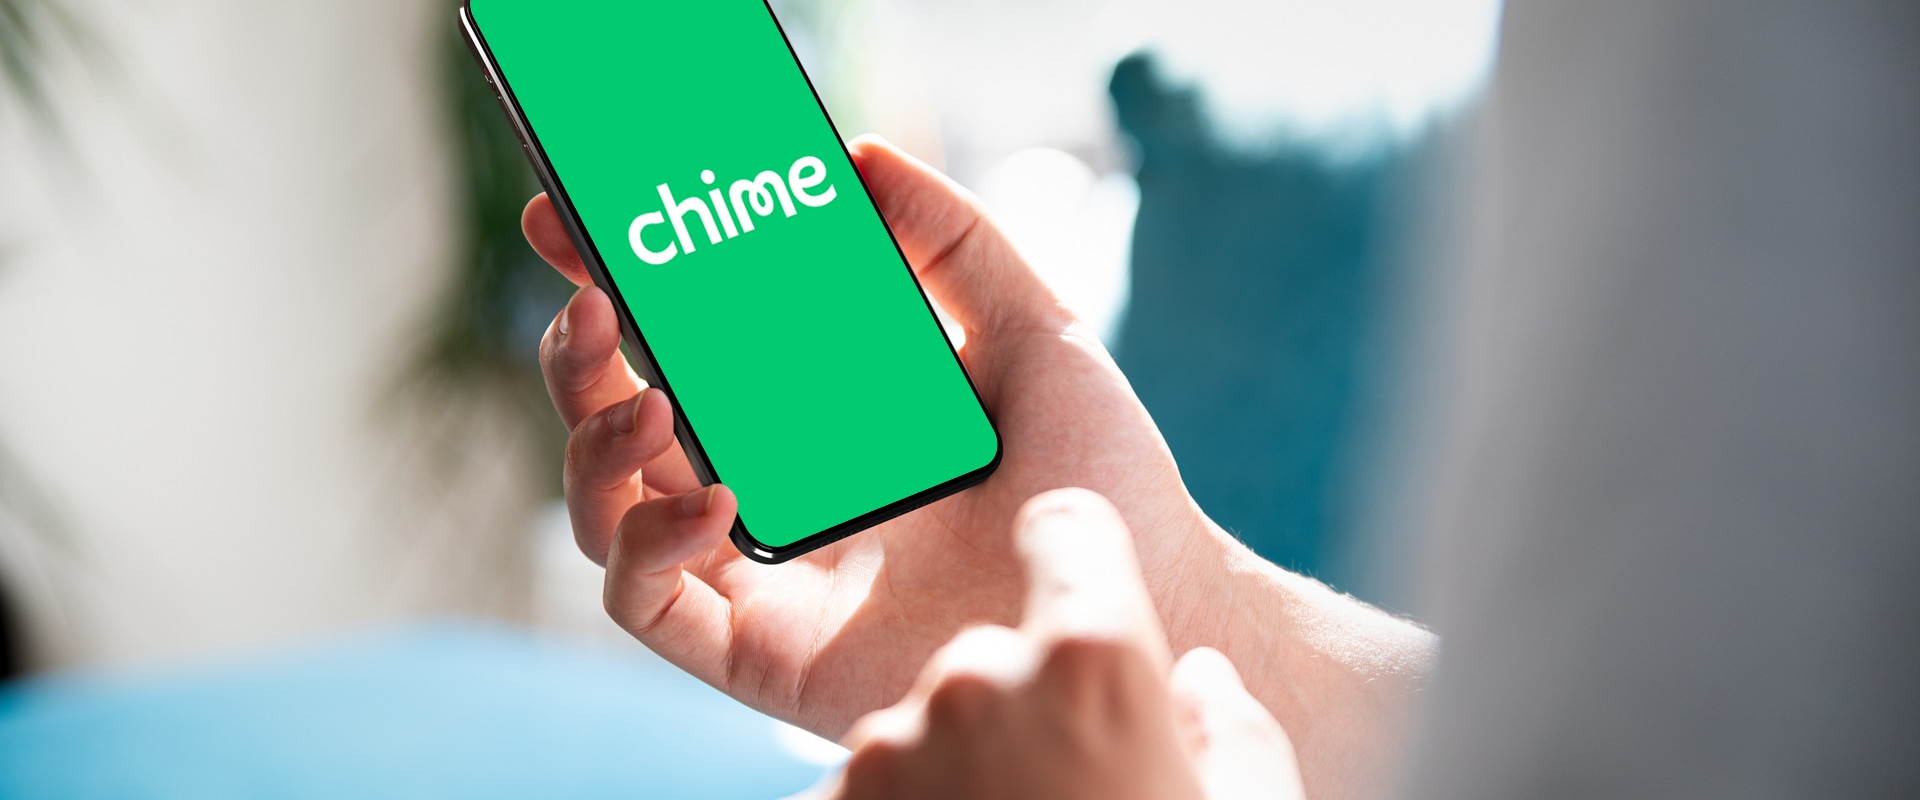 Does Chime Offer Payday Loans?